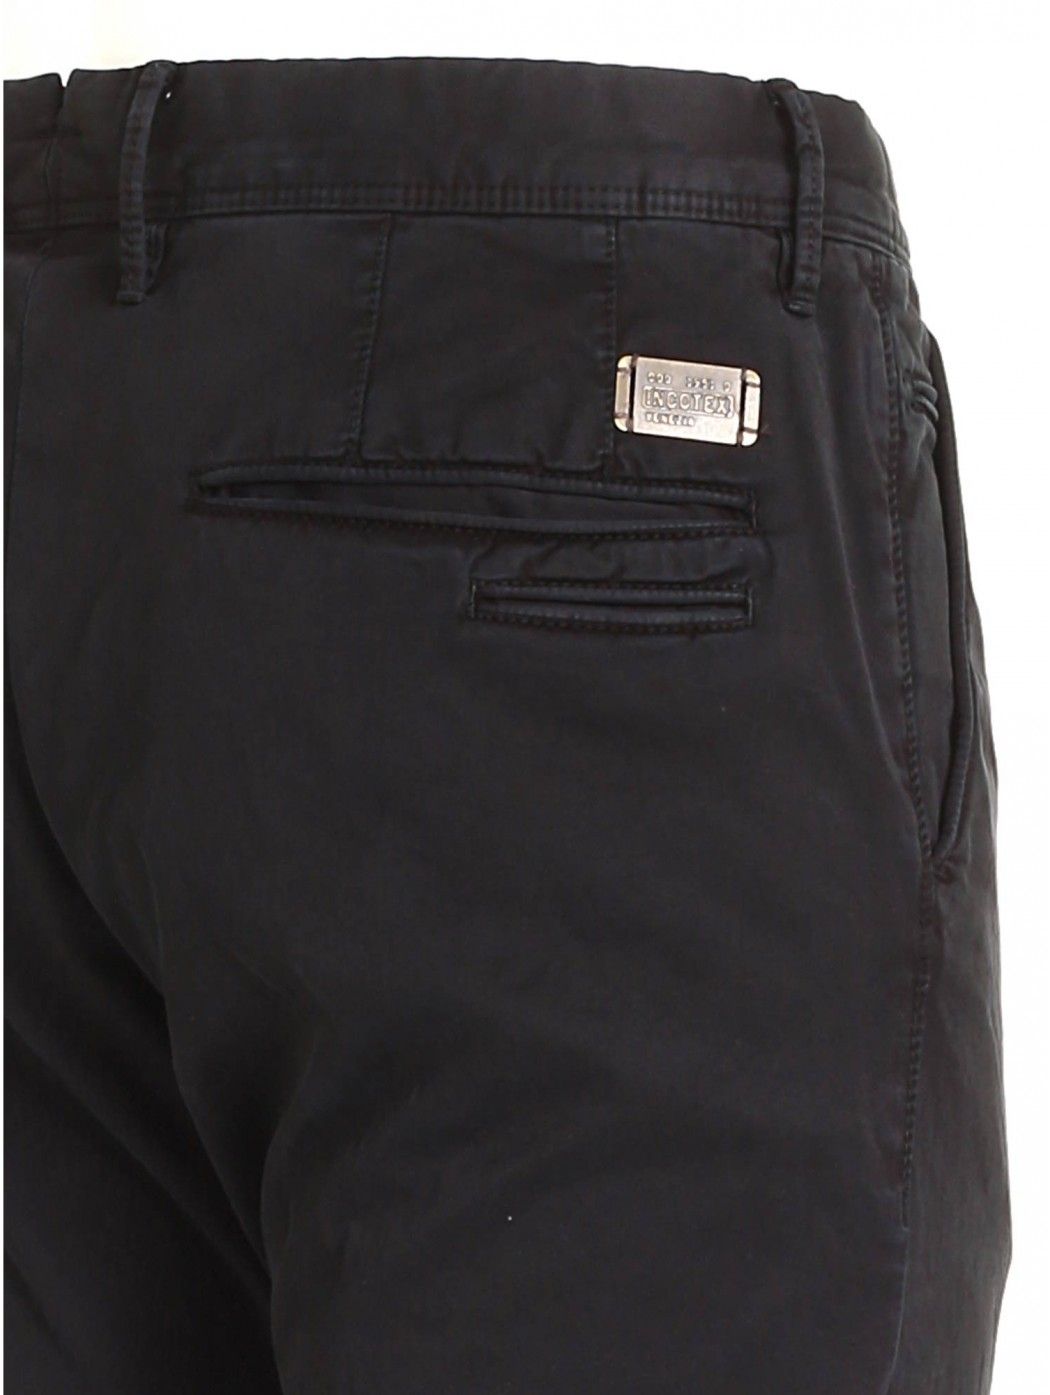 Stretch cotton trousers Color: black Logo detail on the back 5 pockets Zip and button closure  INCOTEX RED